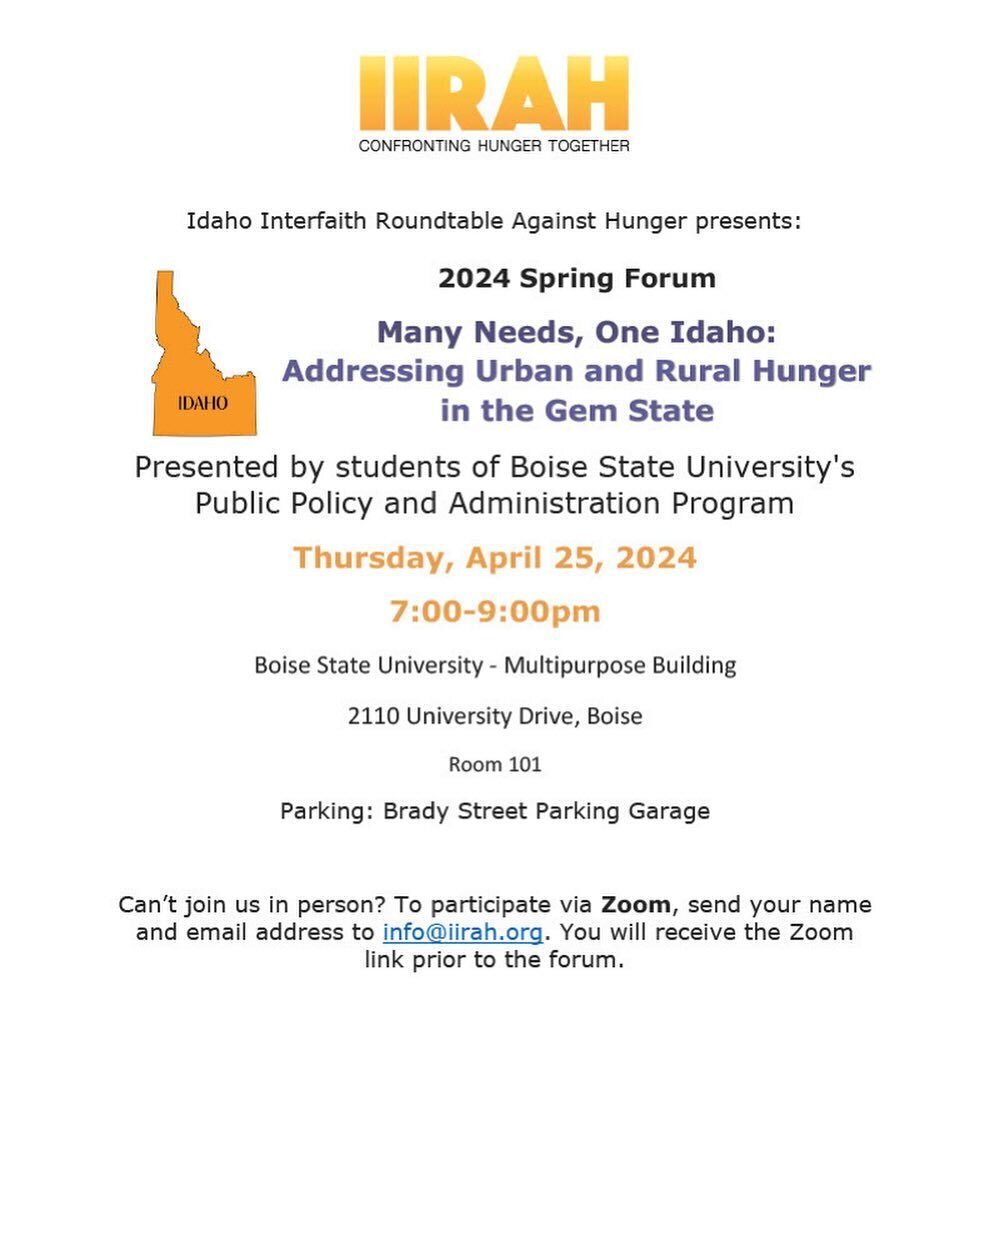 Interested in joining? Attend in person on April 25 from 7-9 PM at the Boise State Multipurpose Building or email info@iirah.org for a zoom link.

#idaho #nonprofit #iirah